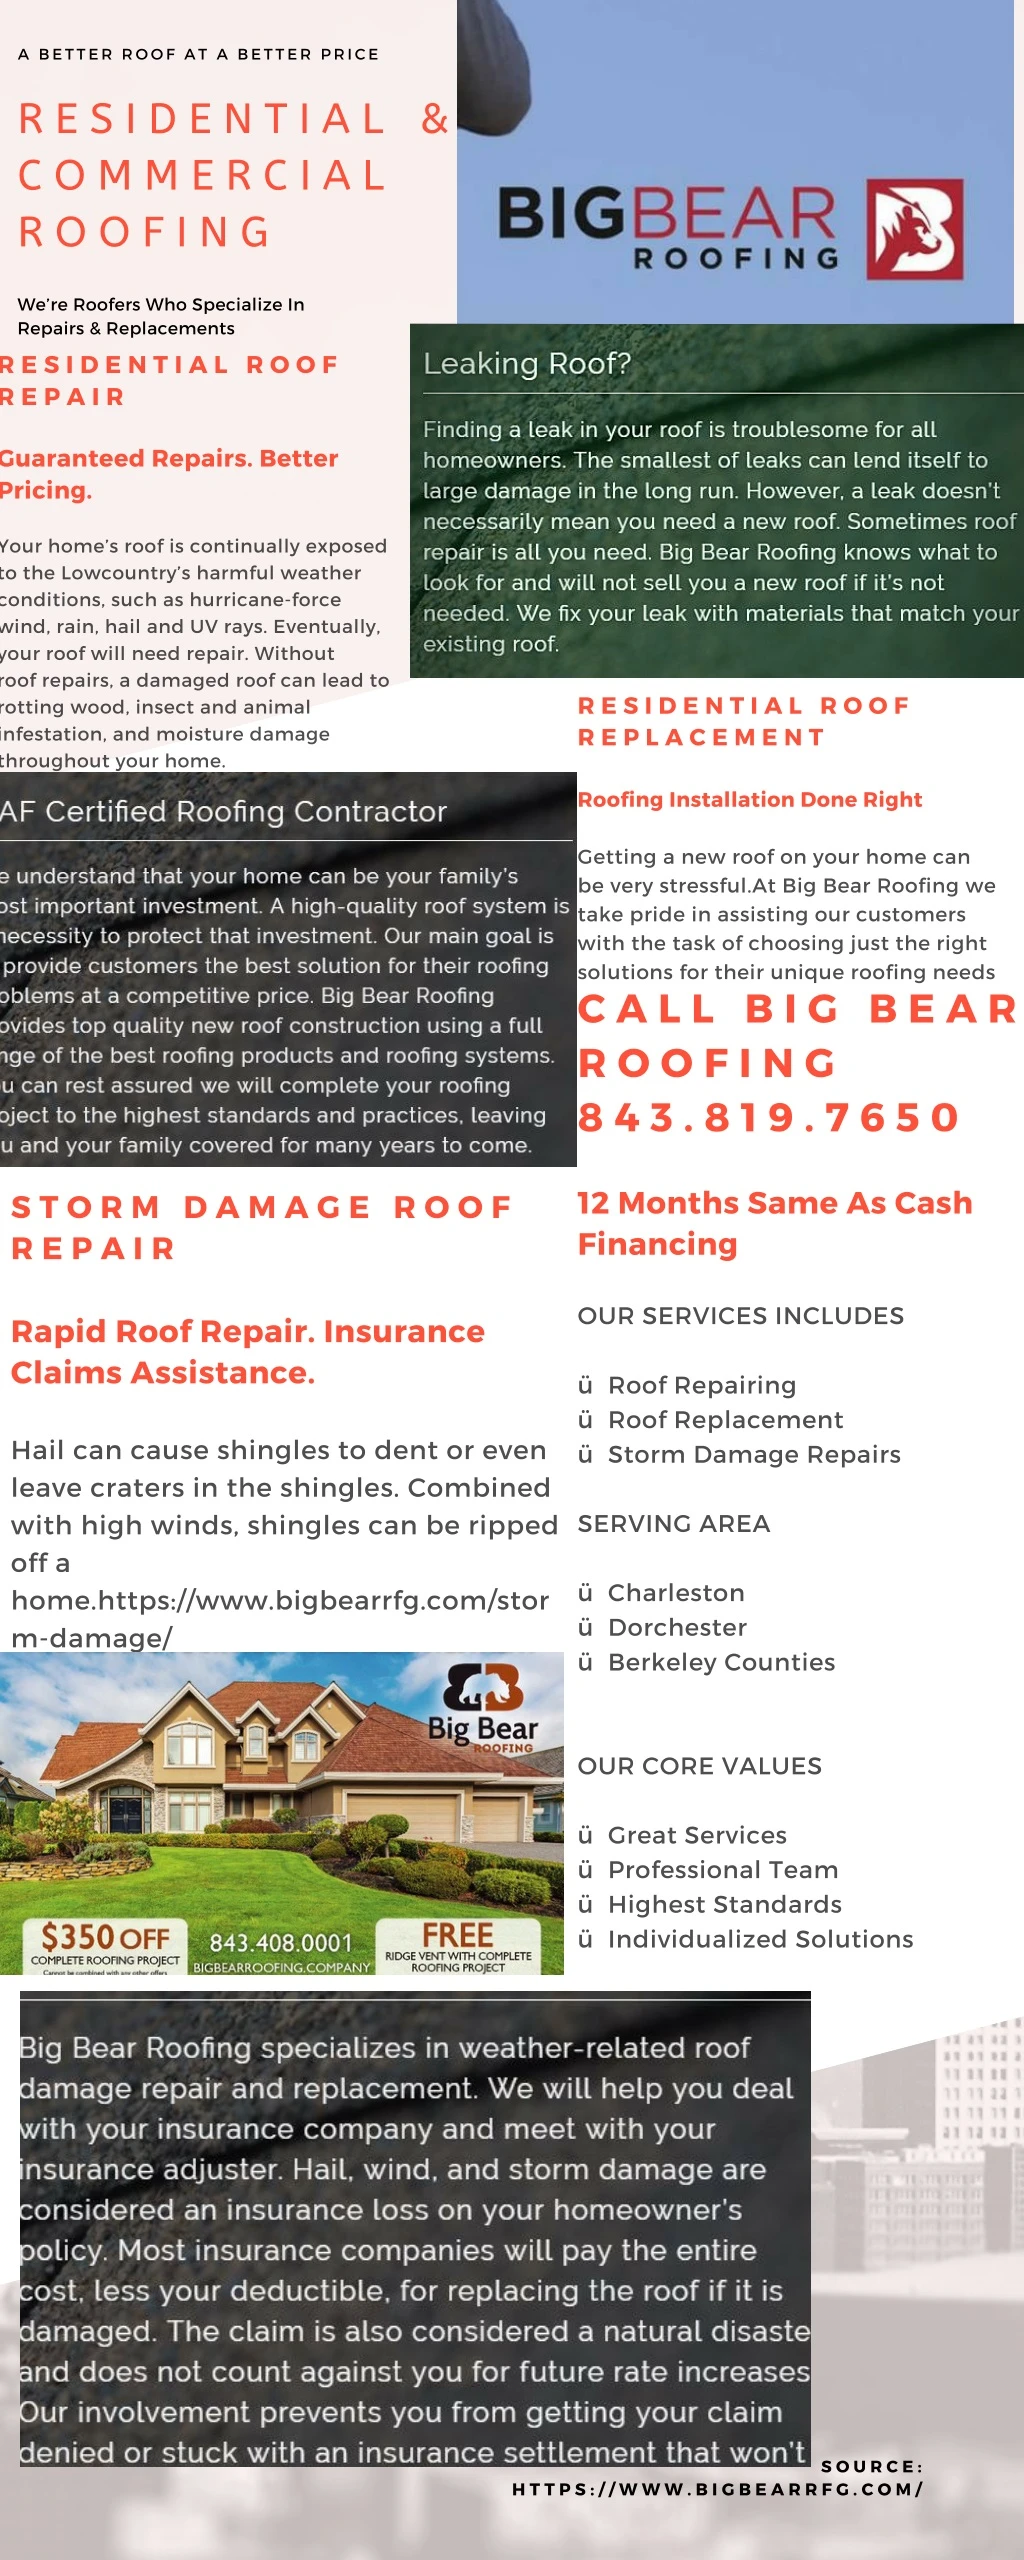 a better roof at a better price